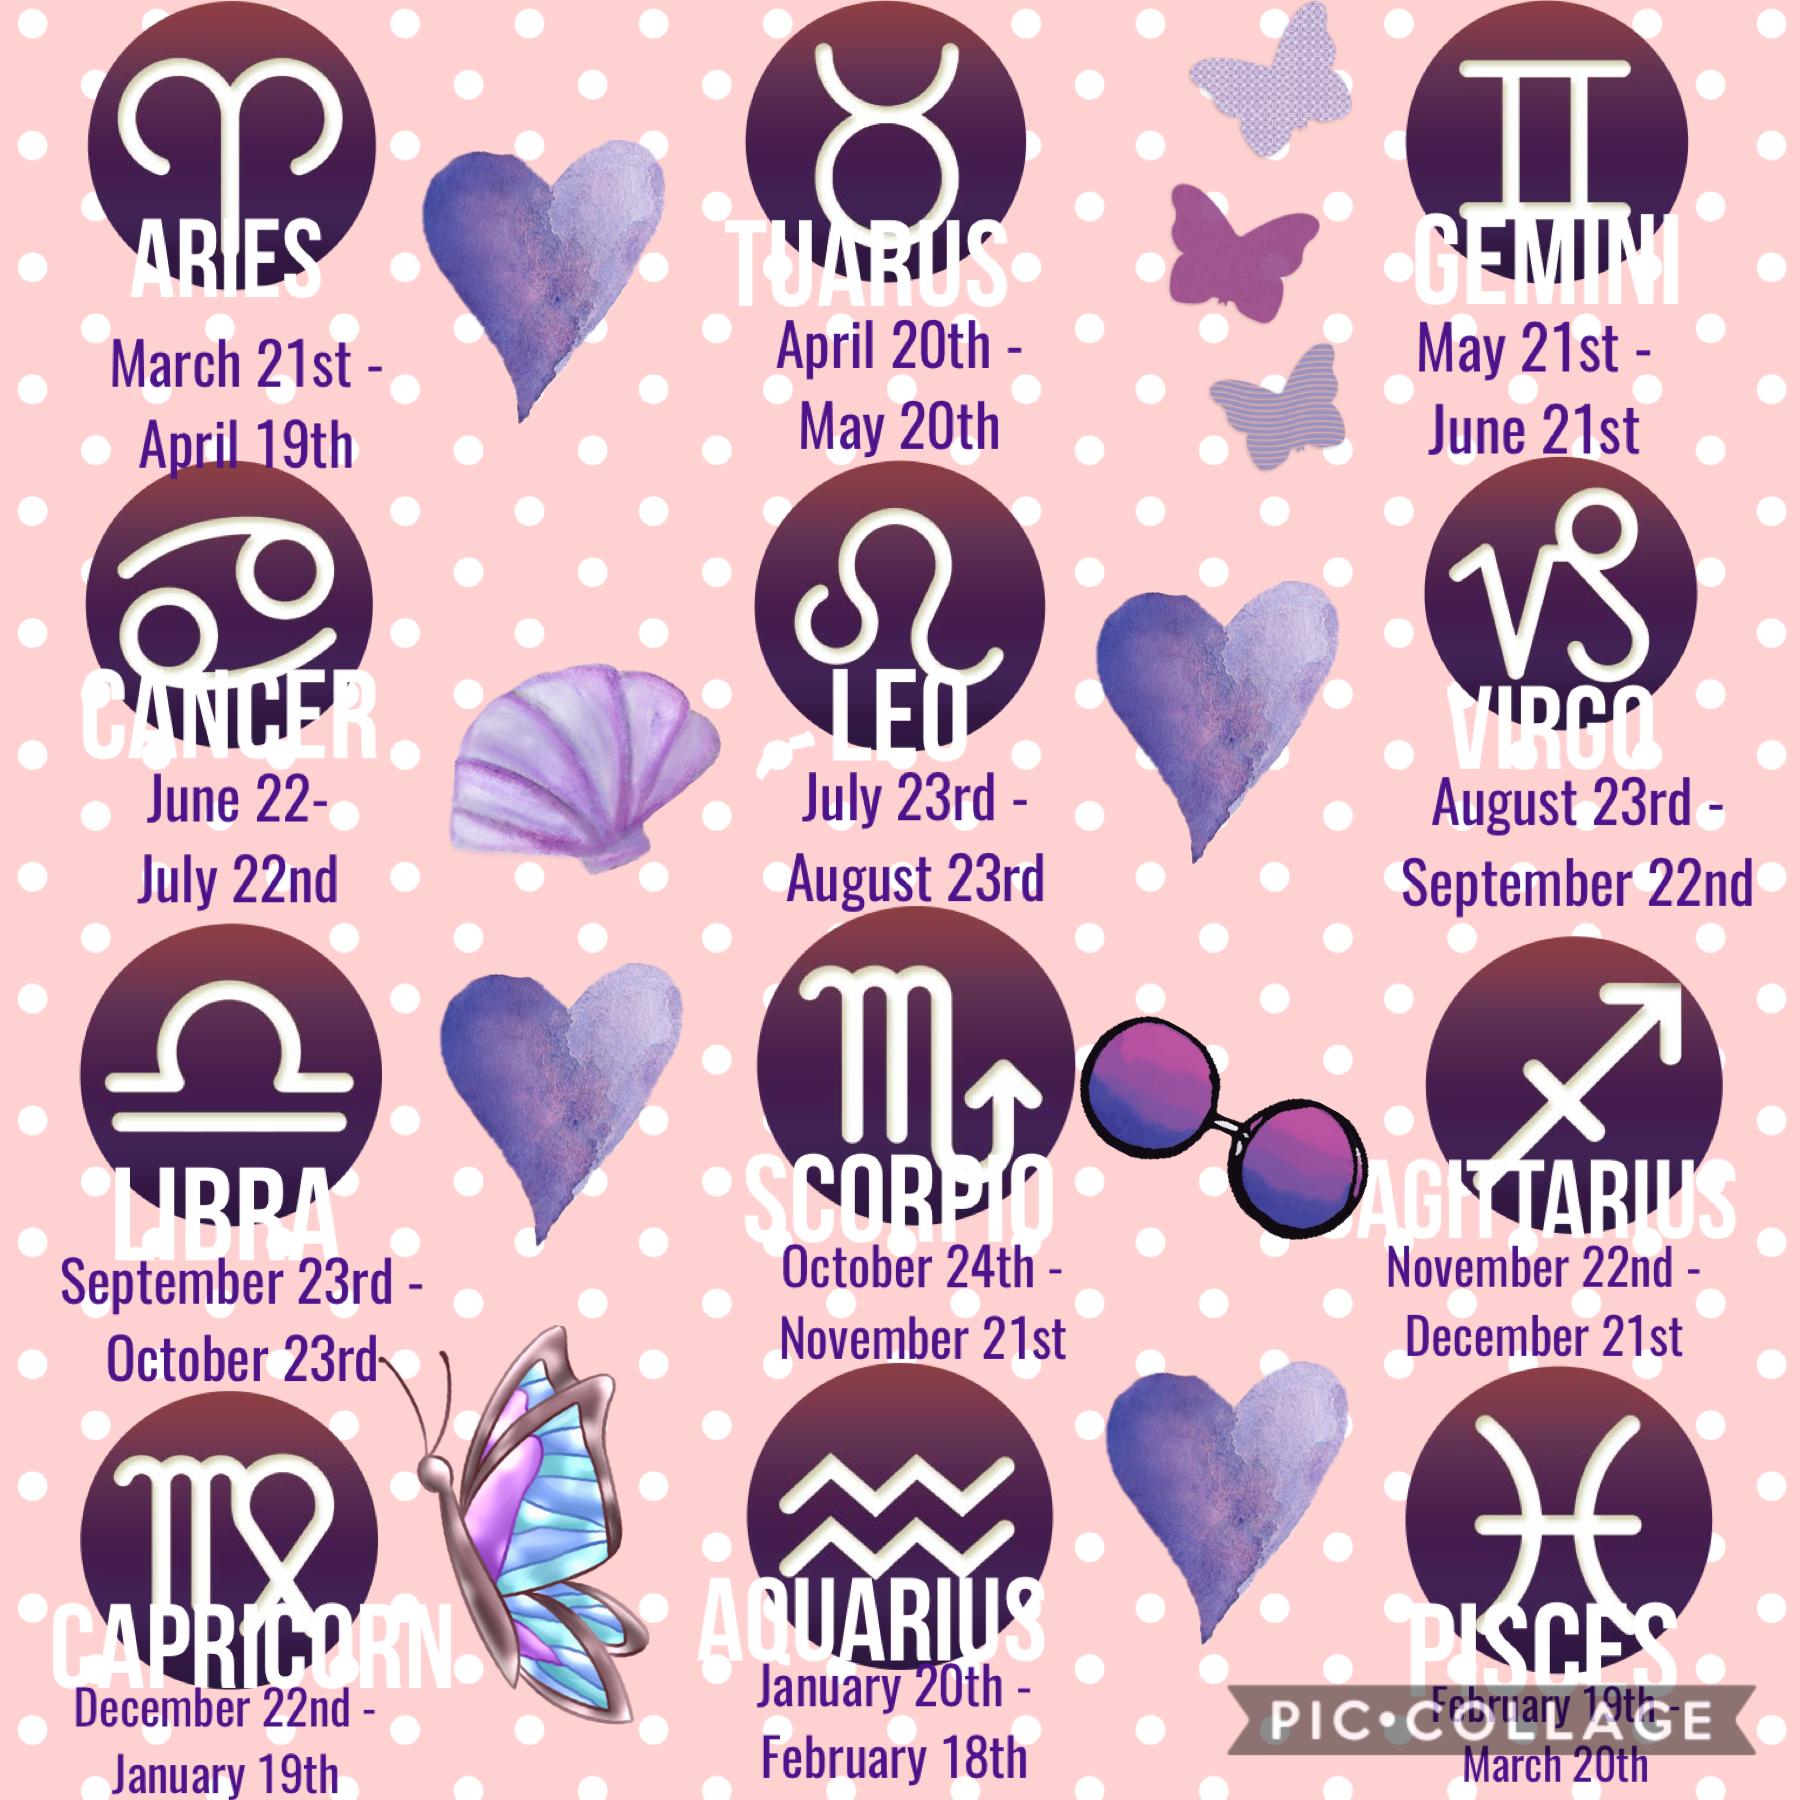 Here’s a chart to see what star sign you are. It’s based on your birthday, so find your birthday to find your sign. For example if you’re born on the 27th of October you would be a Scorpio ♏️.  #zodiac3